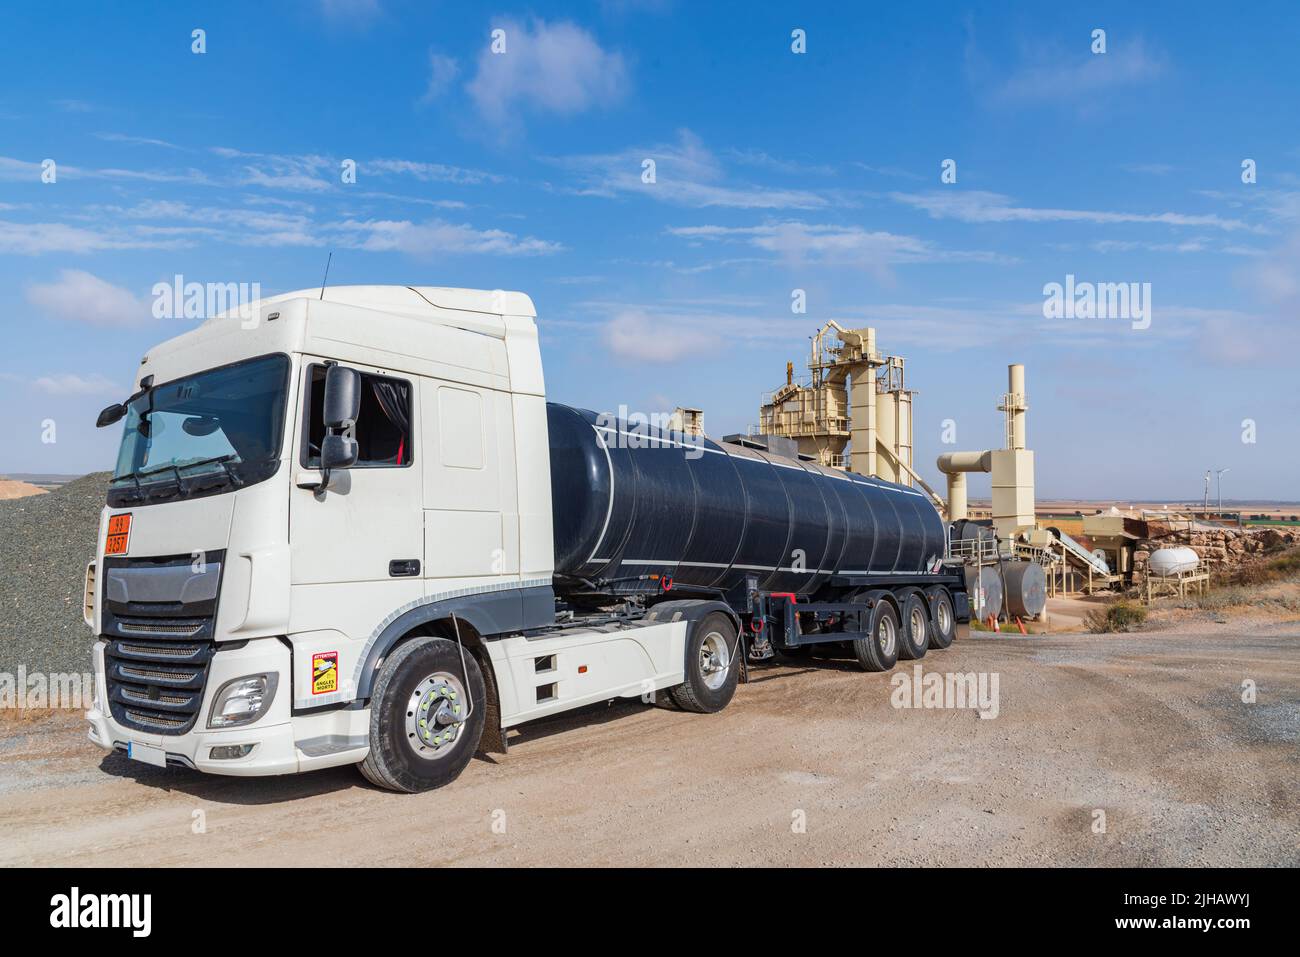 Tanker truck loaded with high temperature bitumen entering an agglomerated asphalt manufacturing plant. Stock Photo